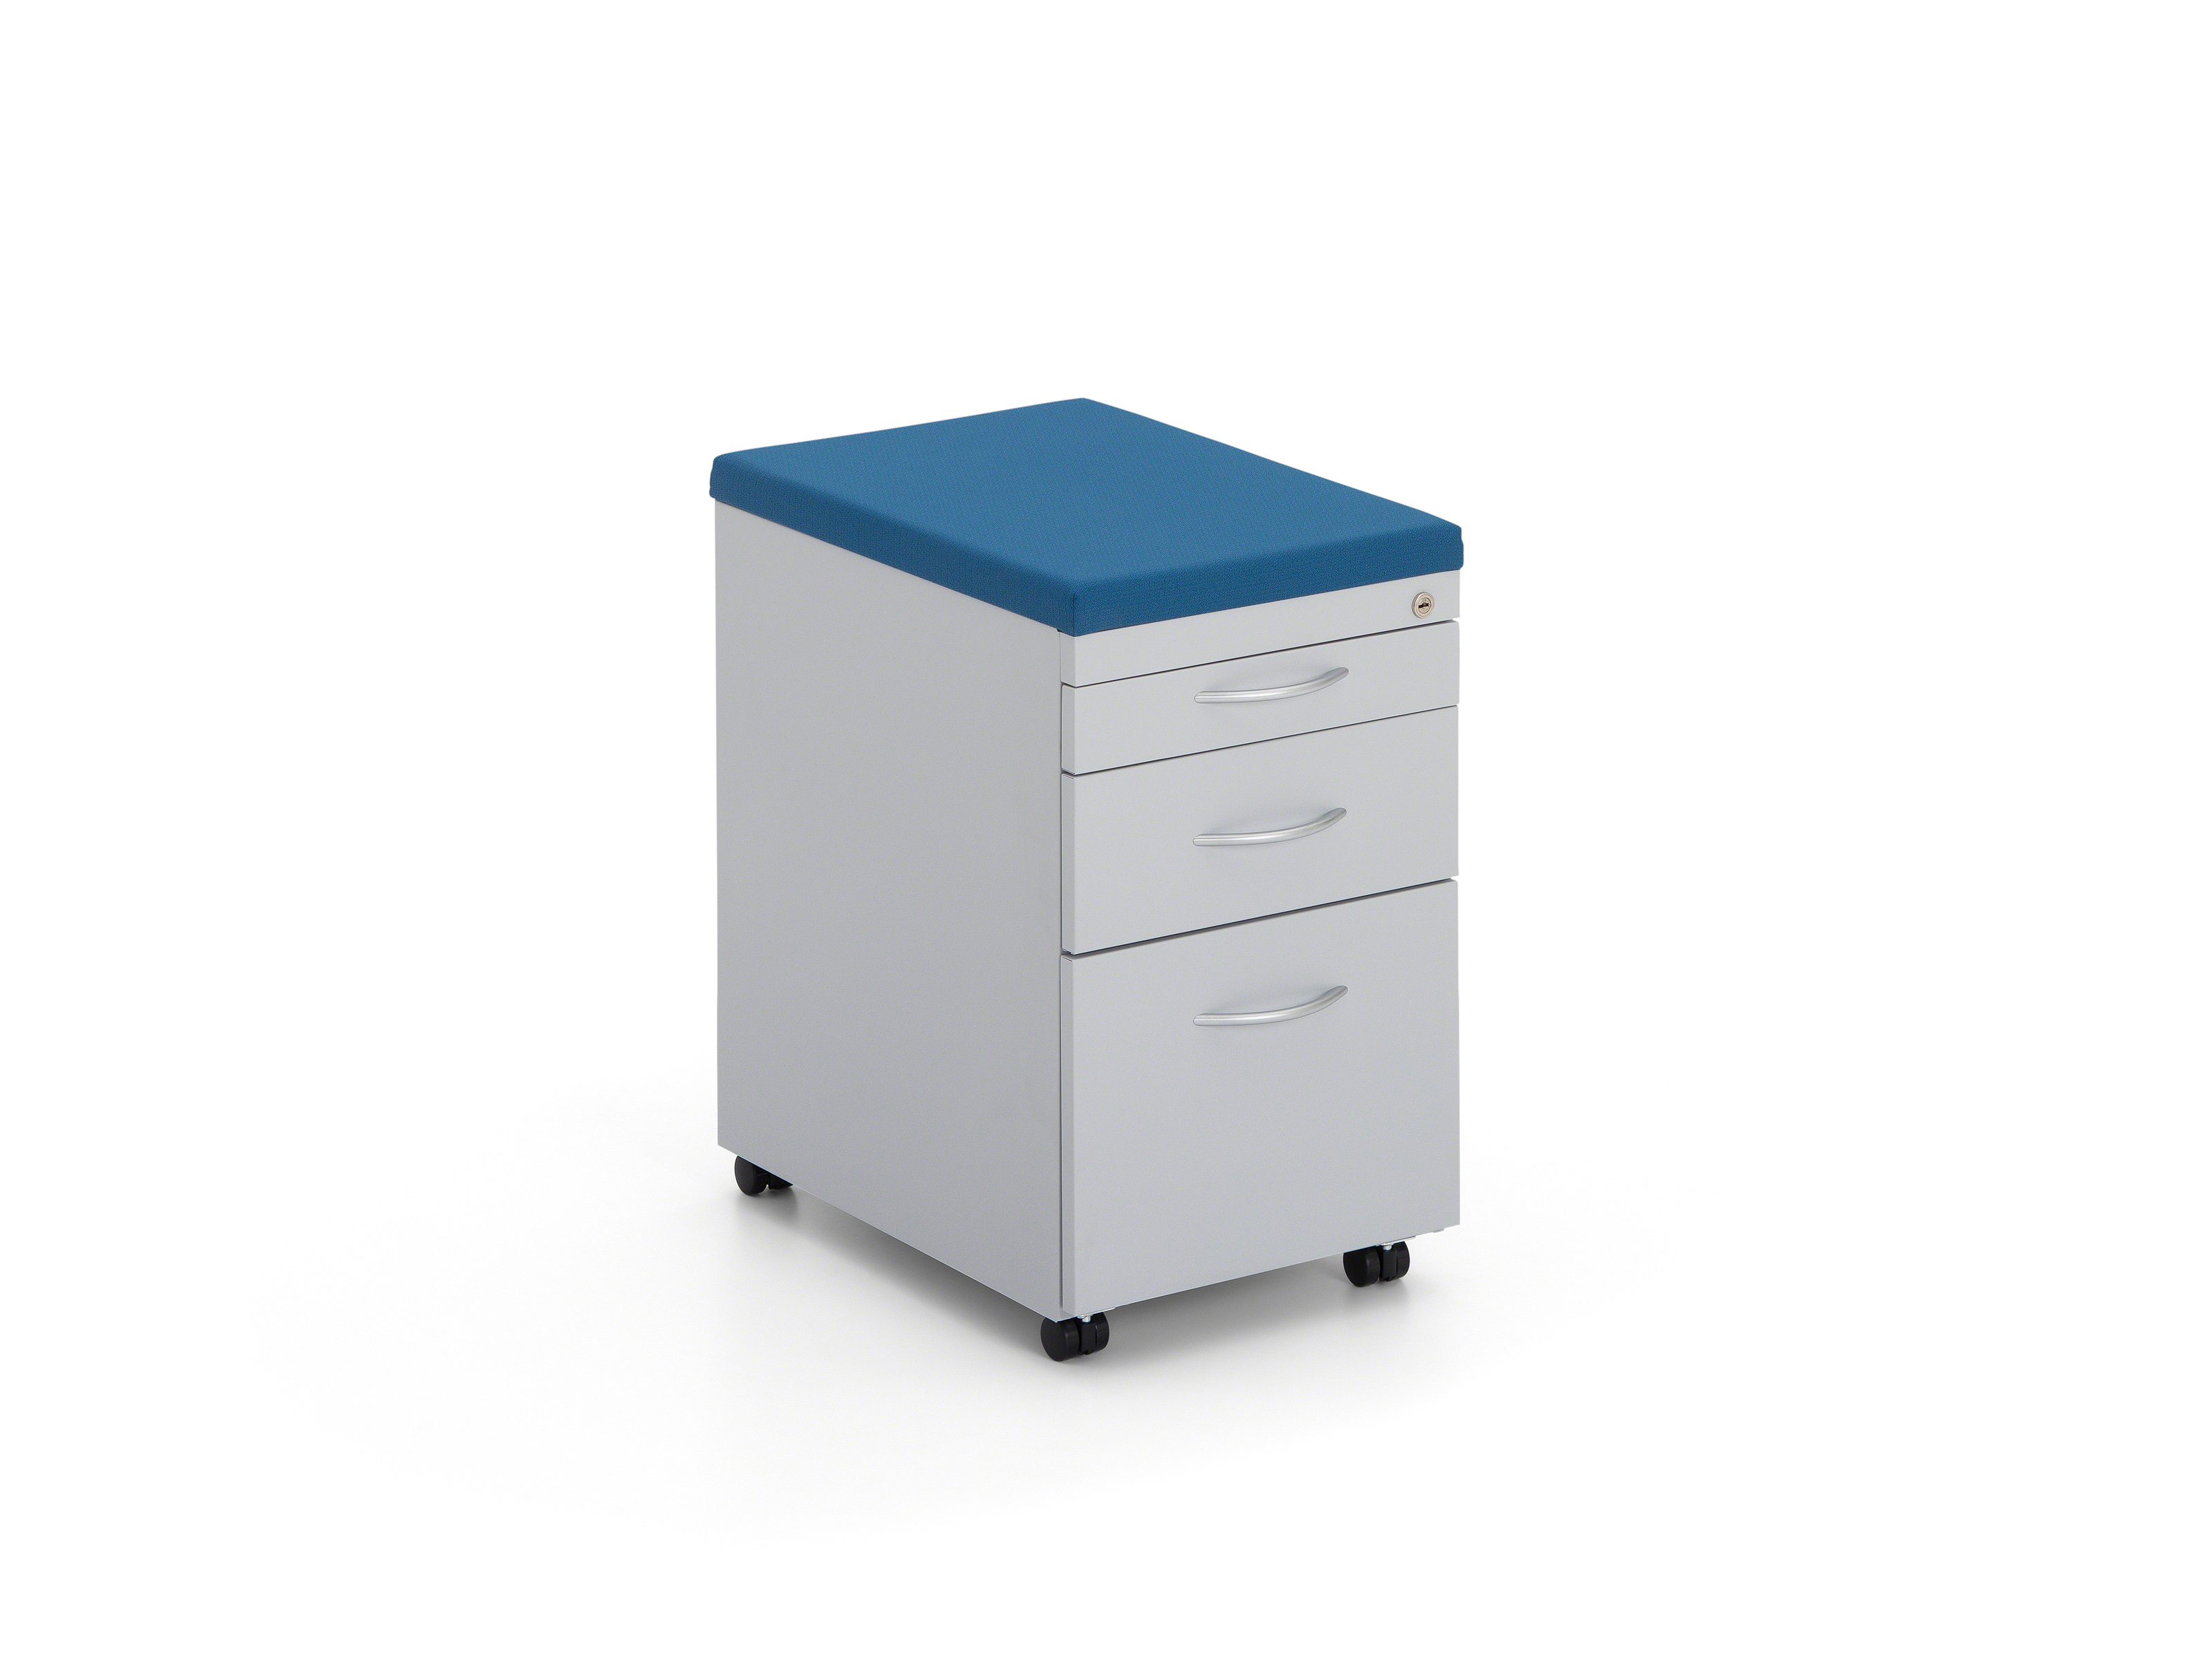 Ts Series Lateral File Cabinets Storage Steelcase in dimensions 3200 X 2400